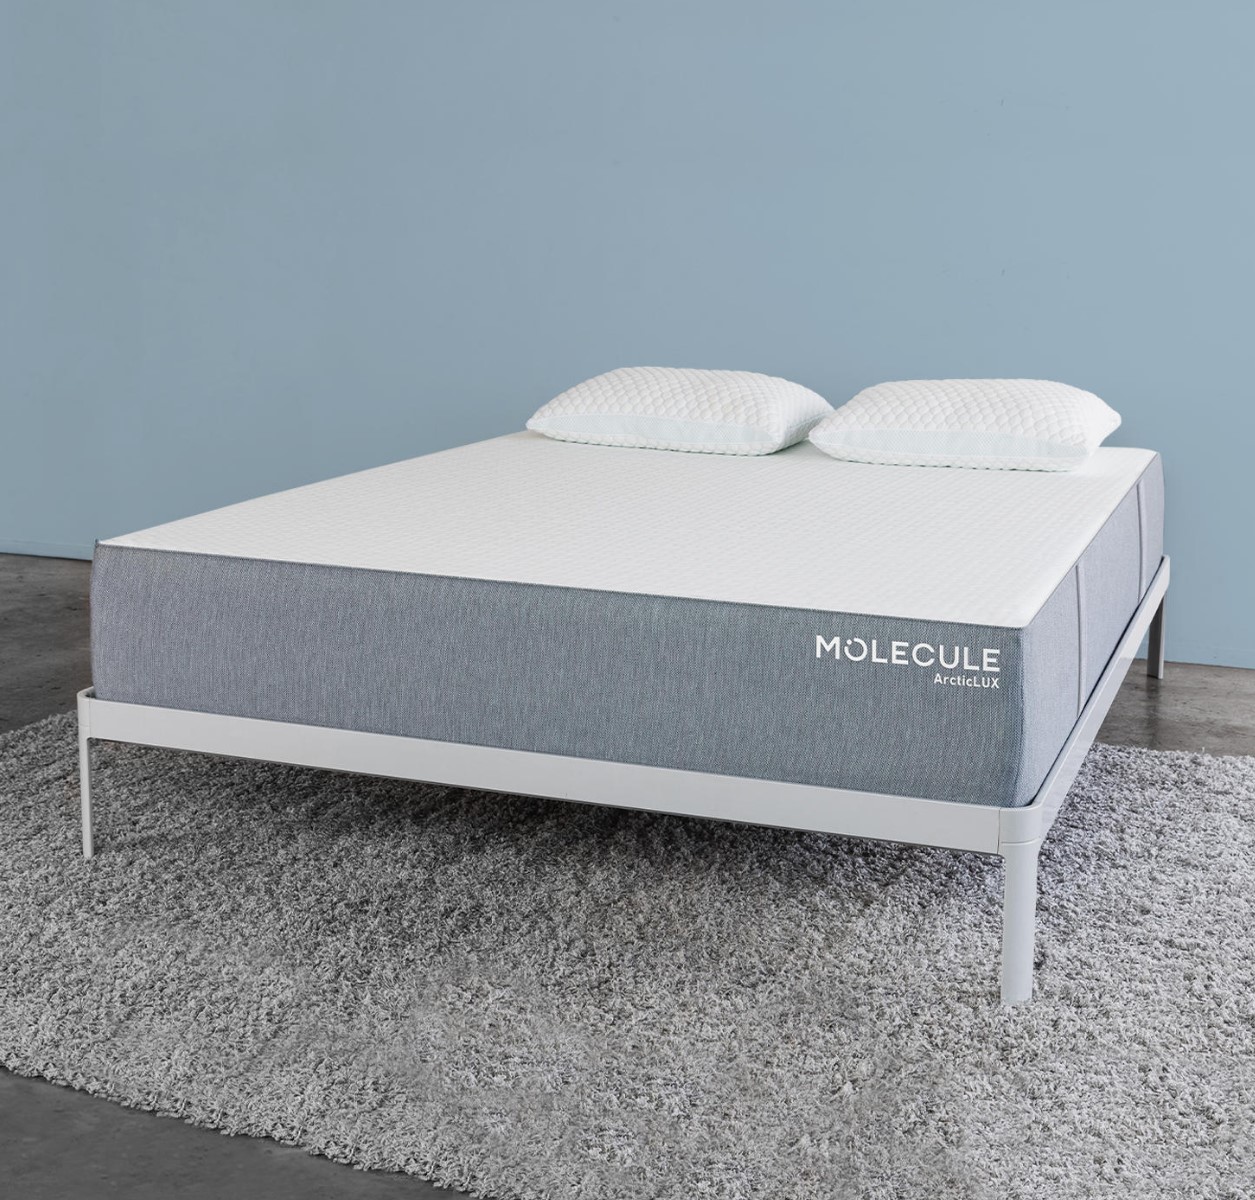 Sam's Club: Up to $120 Off Molecule ArcticLUX 12" Cooling Antimicrobial Mattresses